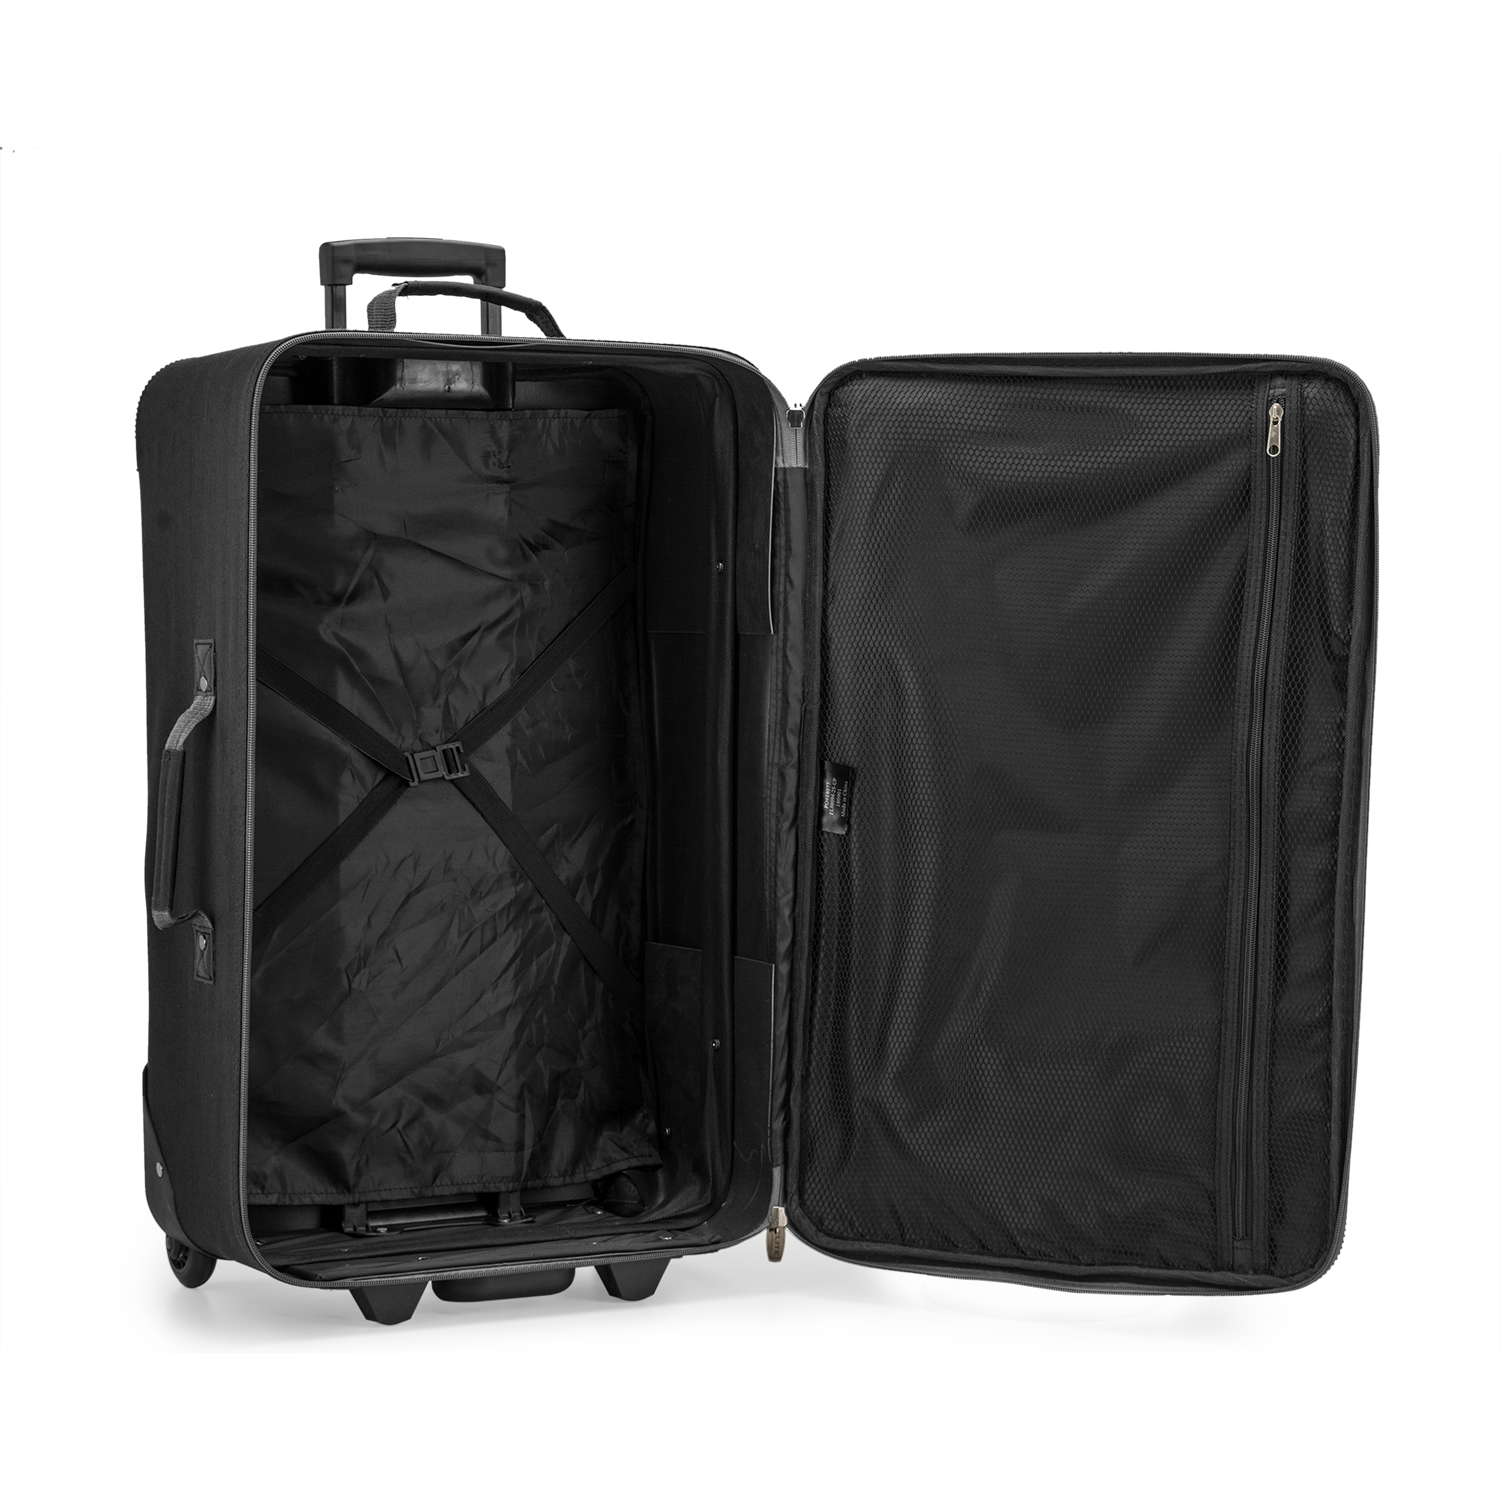 Elite Luggage Whitfield 5-Piece Softside Lightweight Rolling Luggage ...